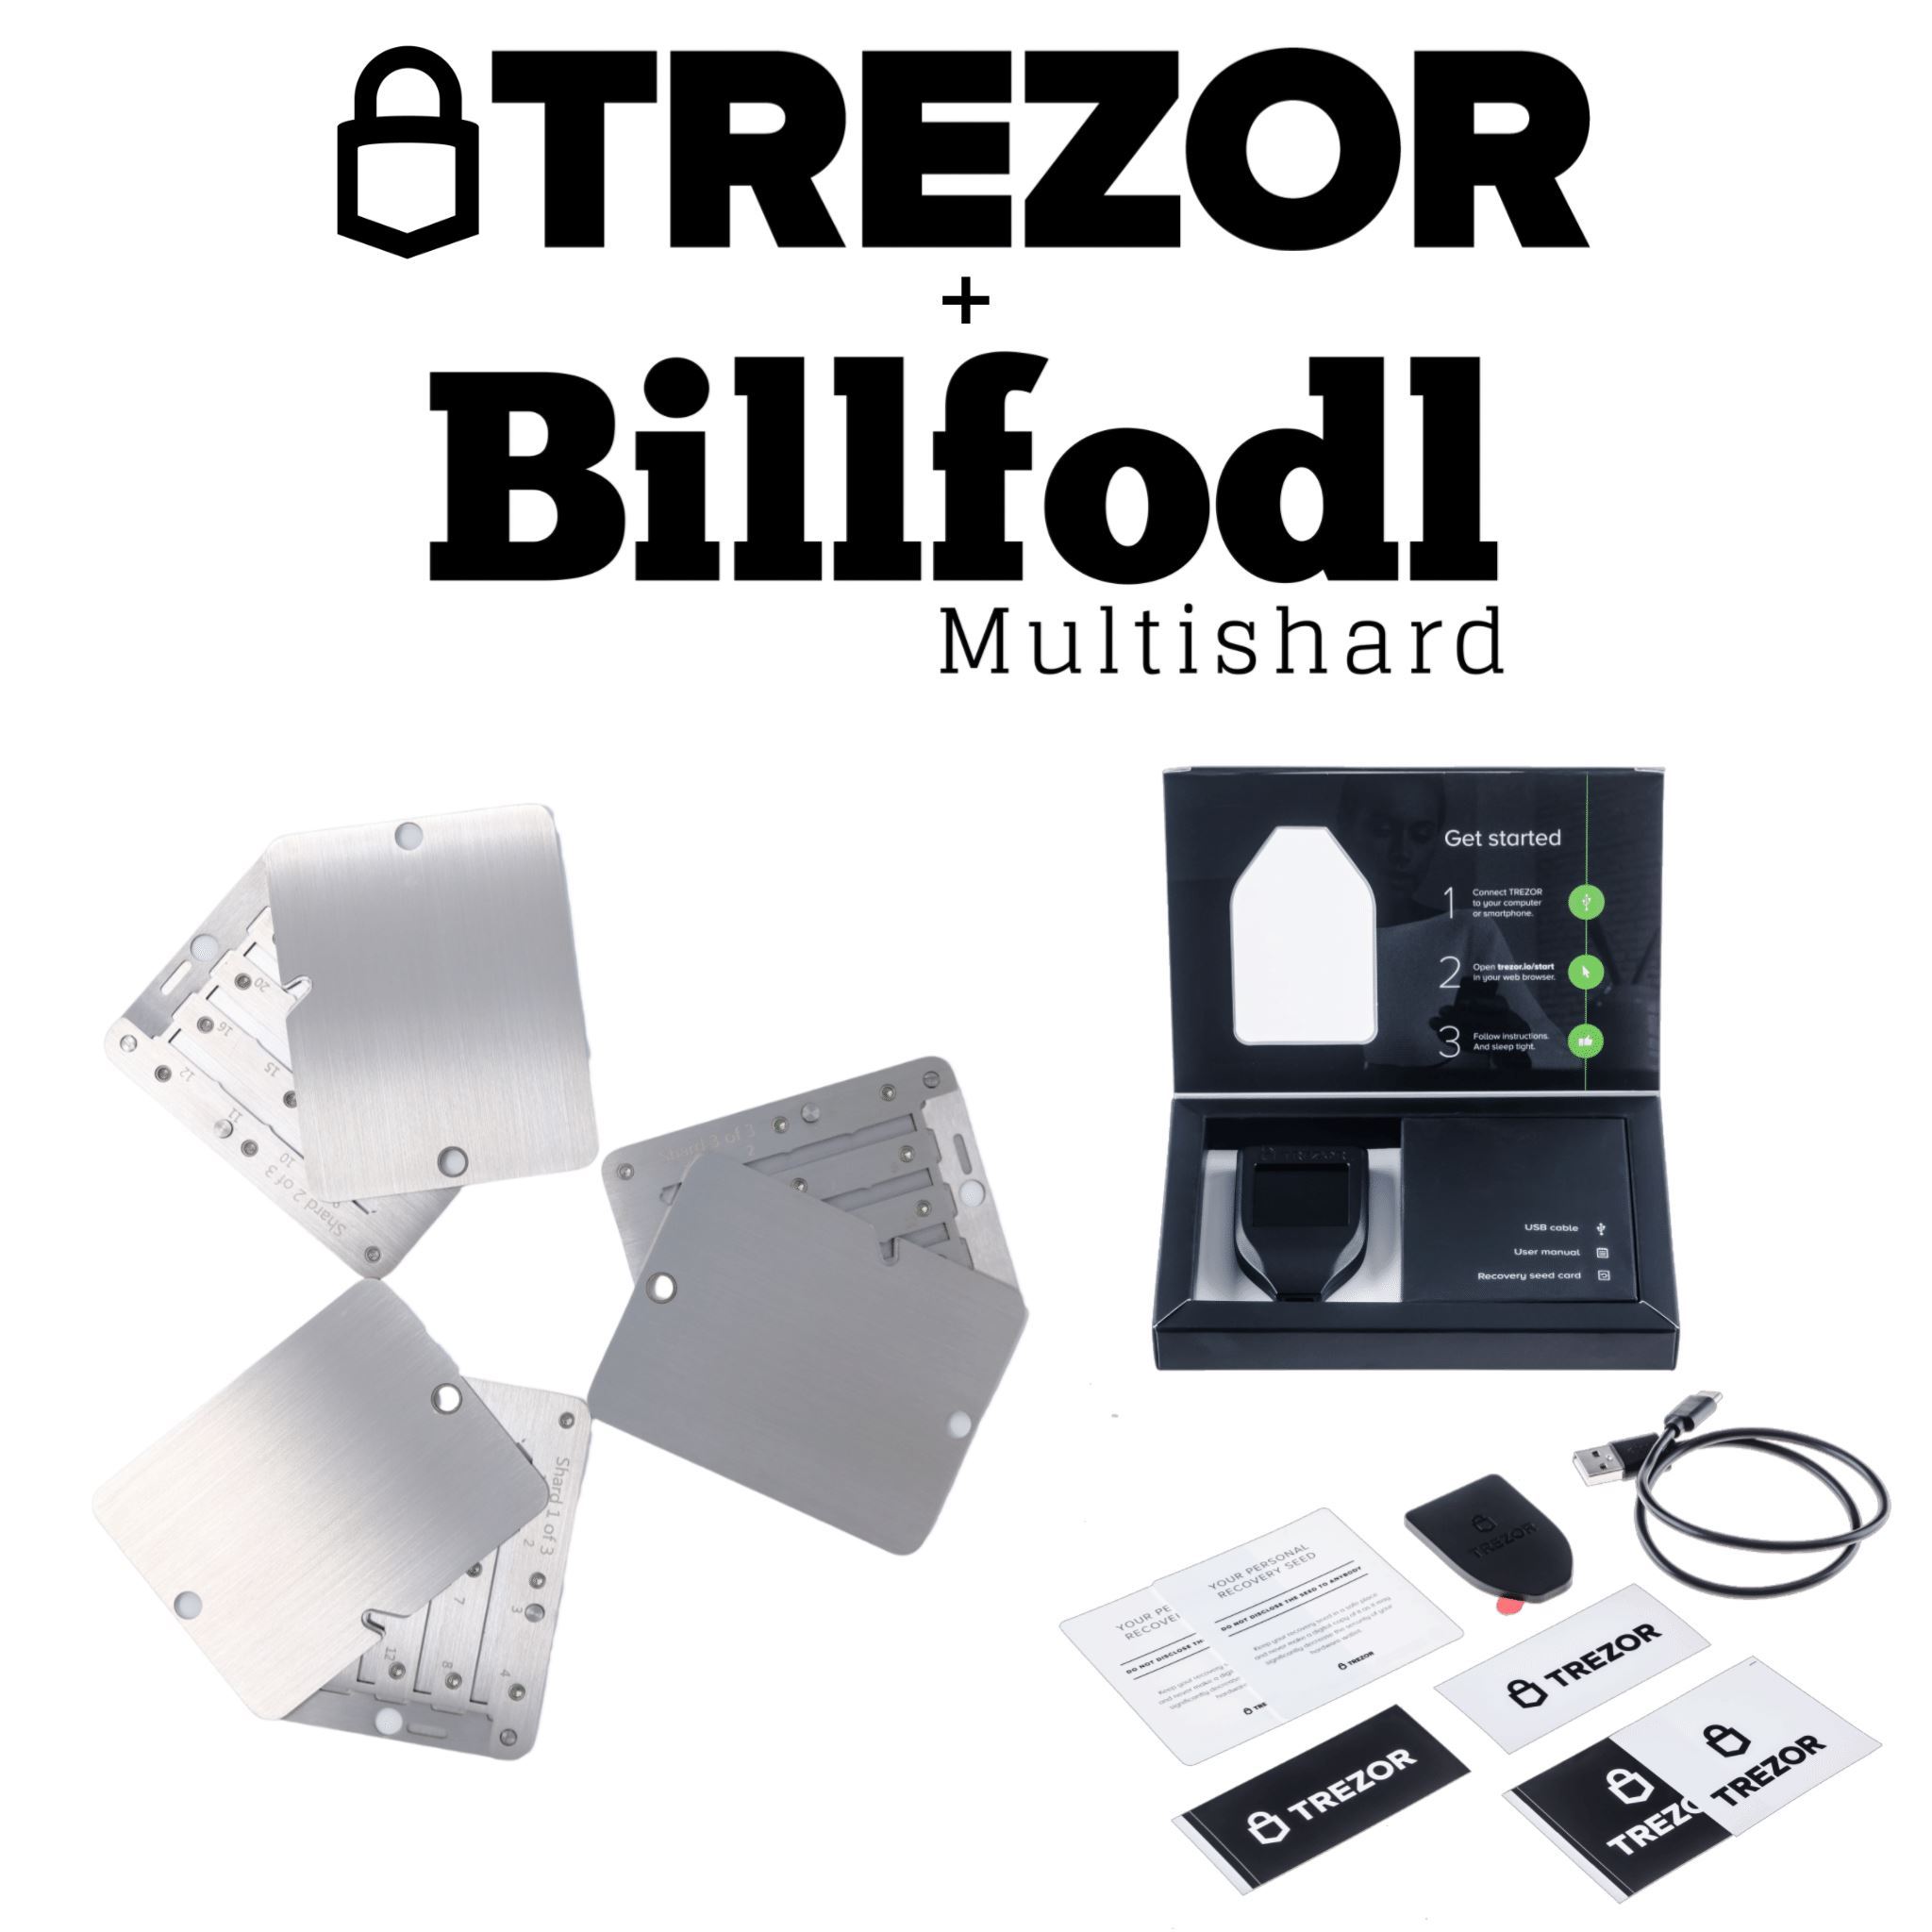 Trezor Model T and Billfodl Box Contents